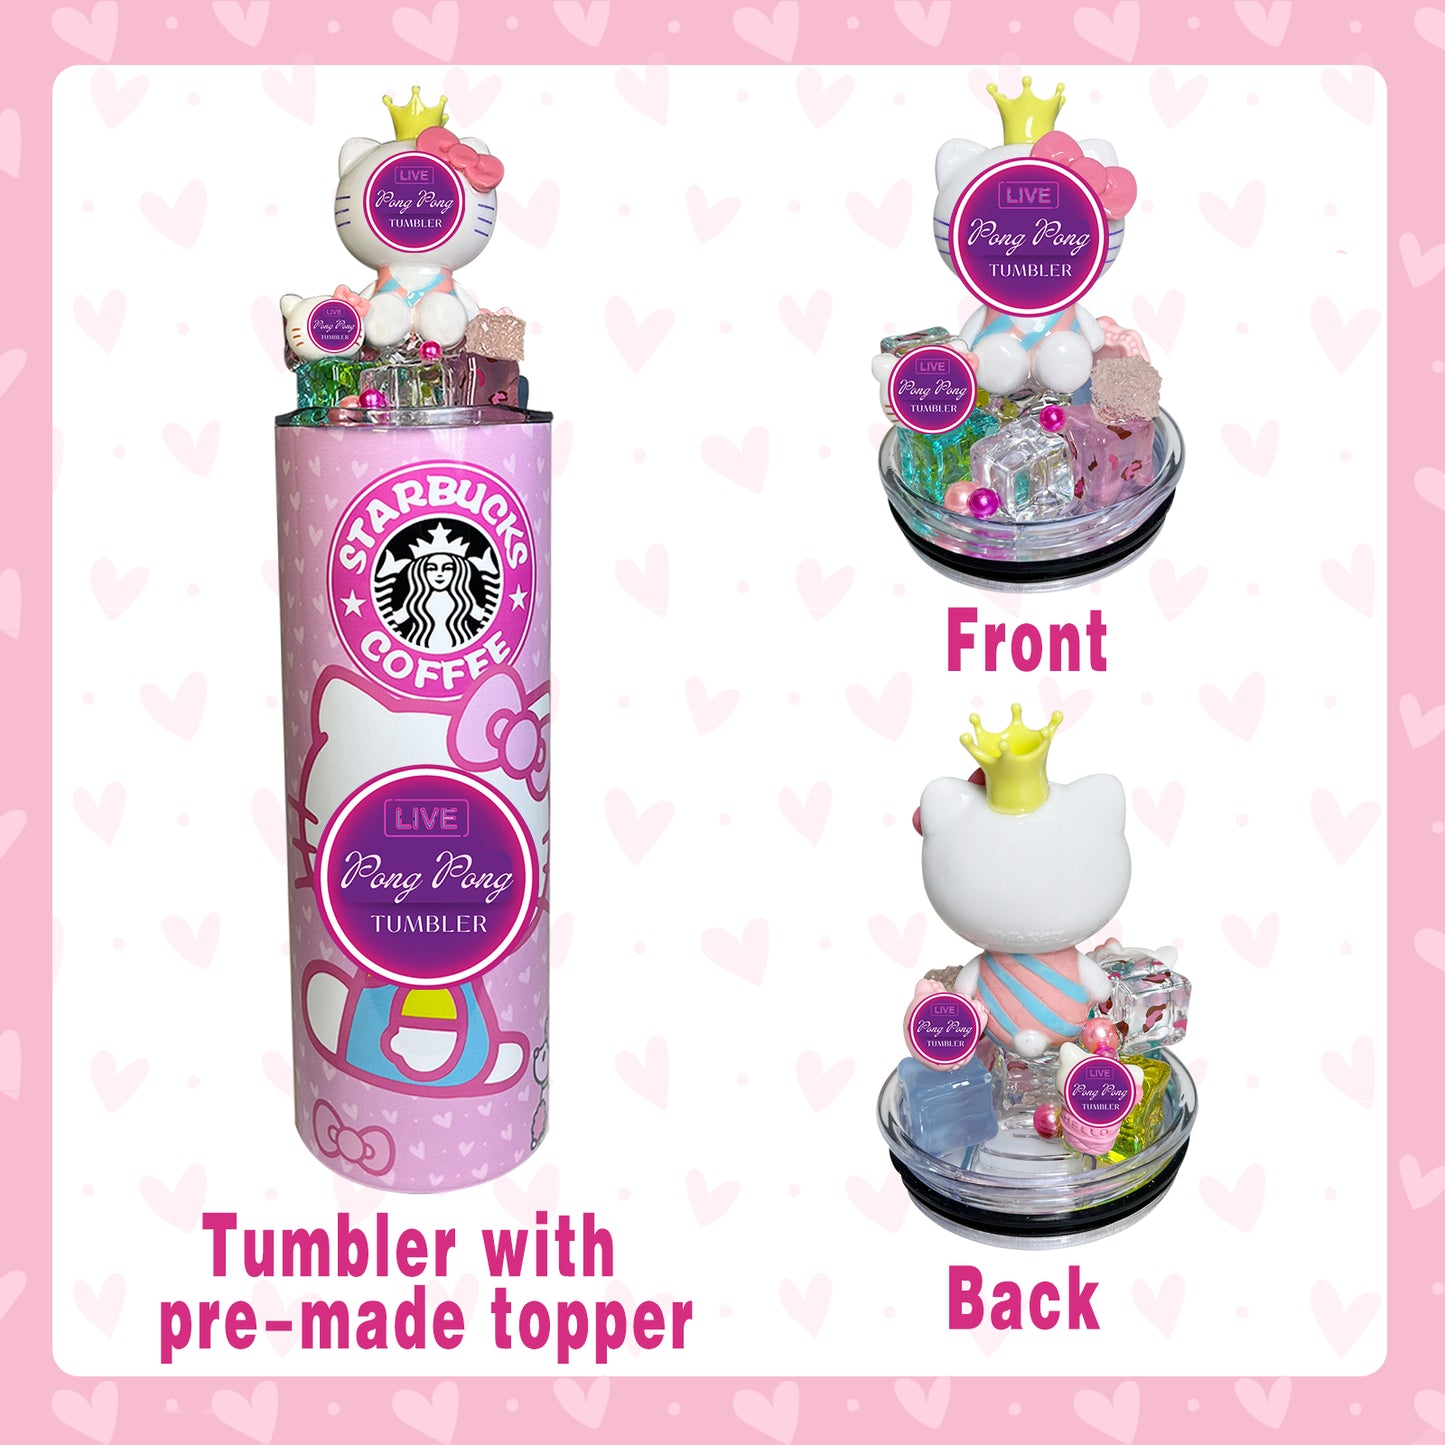 Year-end Hot Sale - Tumbler with Topper - Buy 2 Get 10% Extra Off&Free Shipping